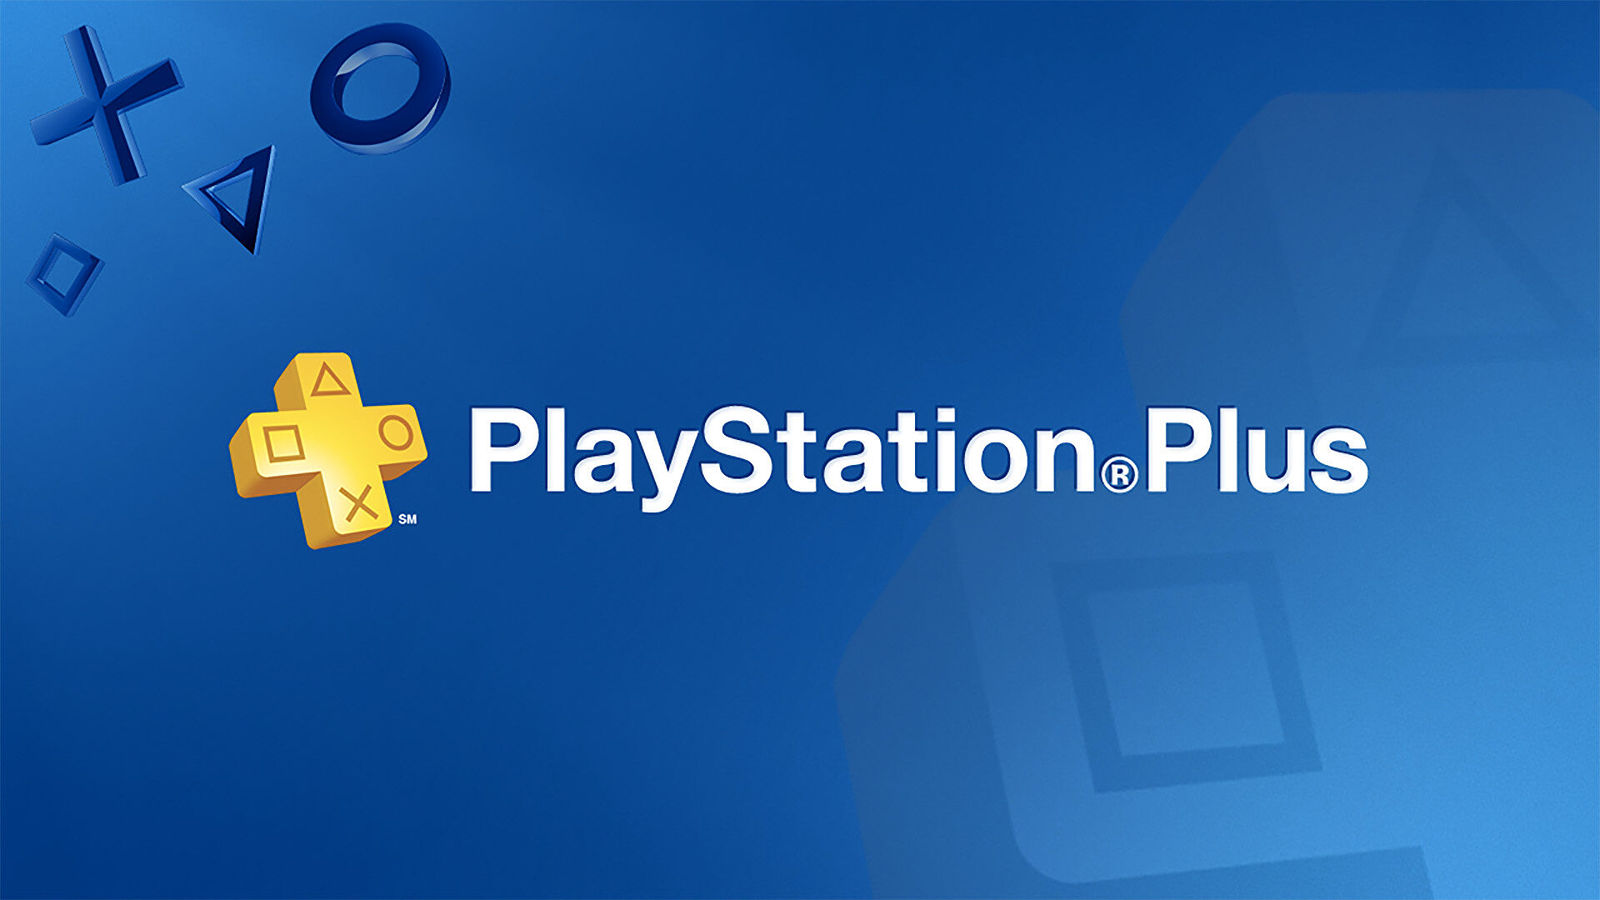 PS Plus free multiplayer